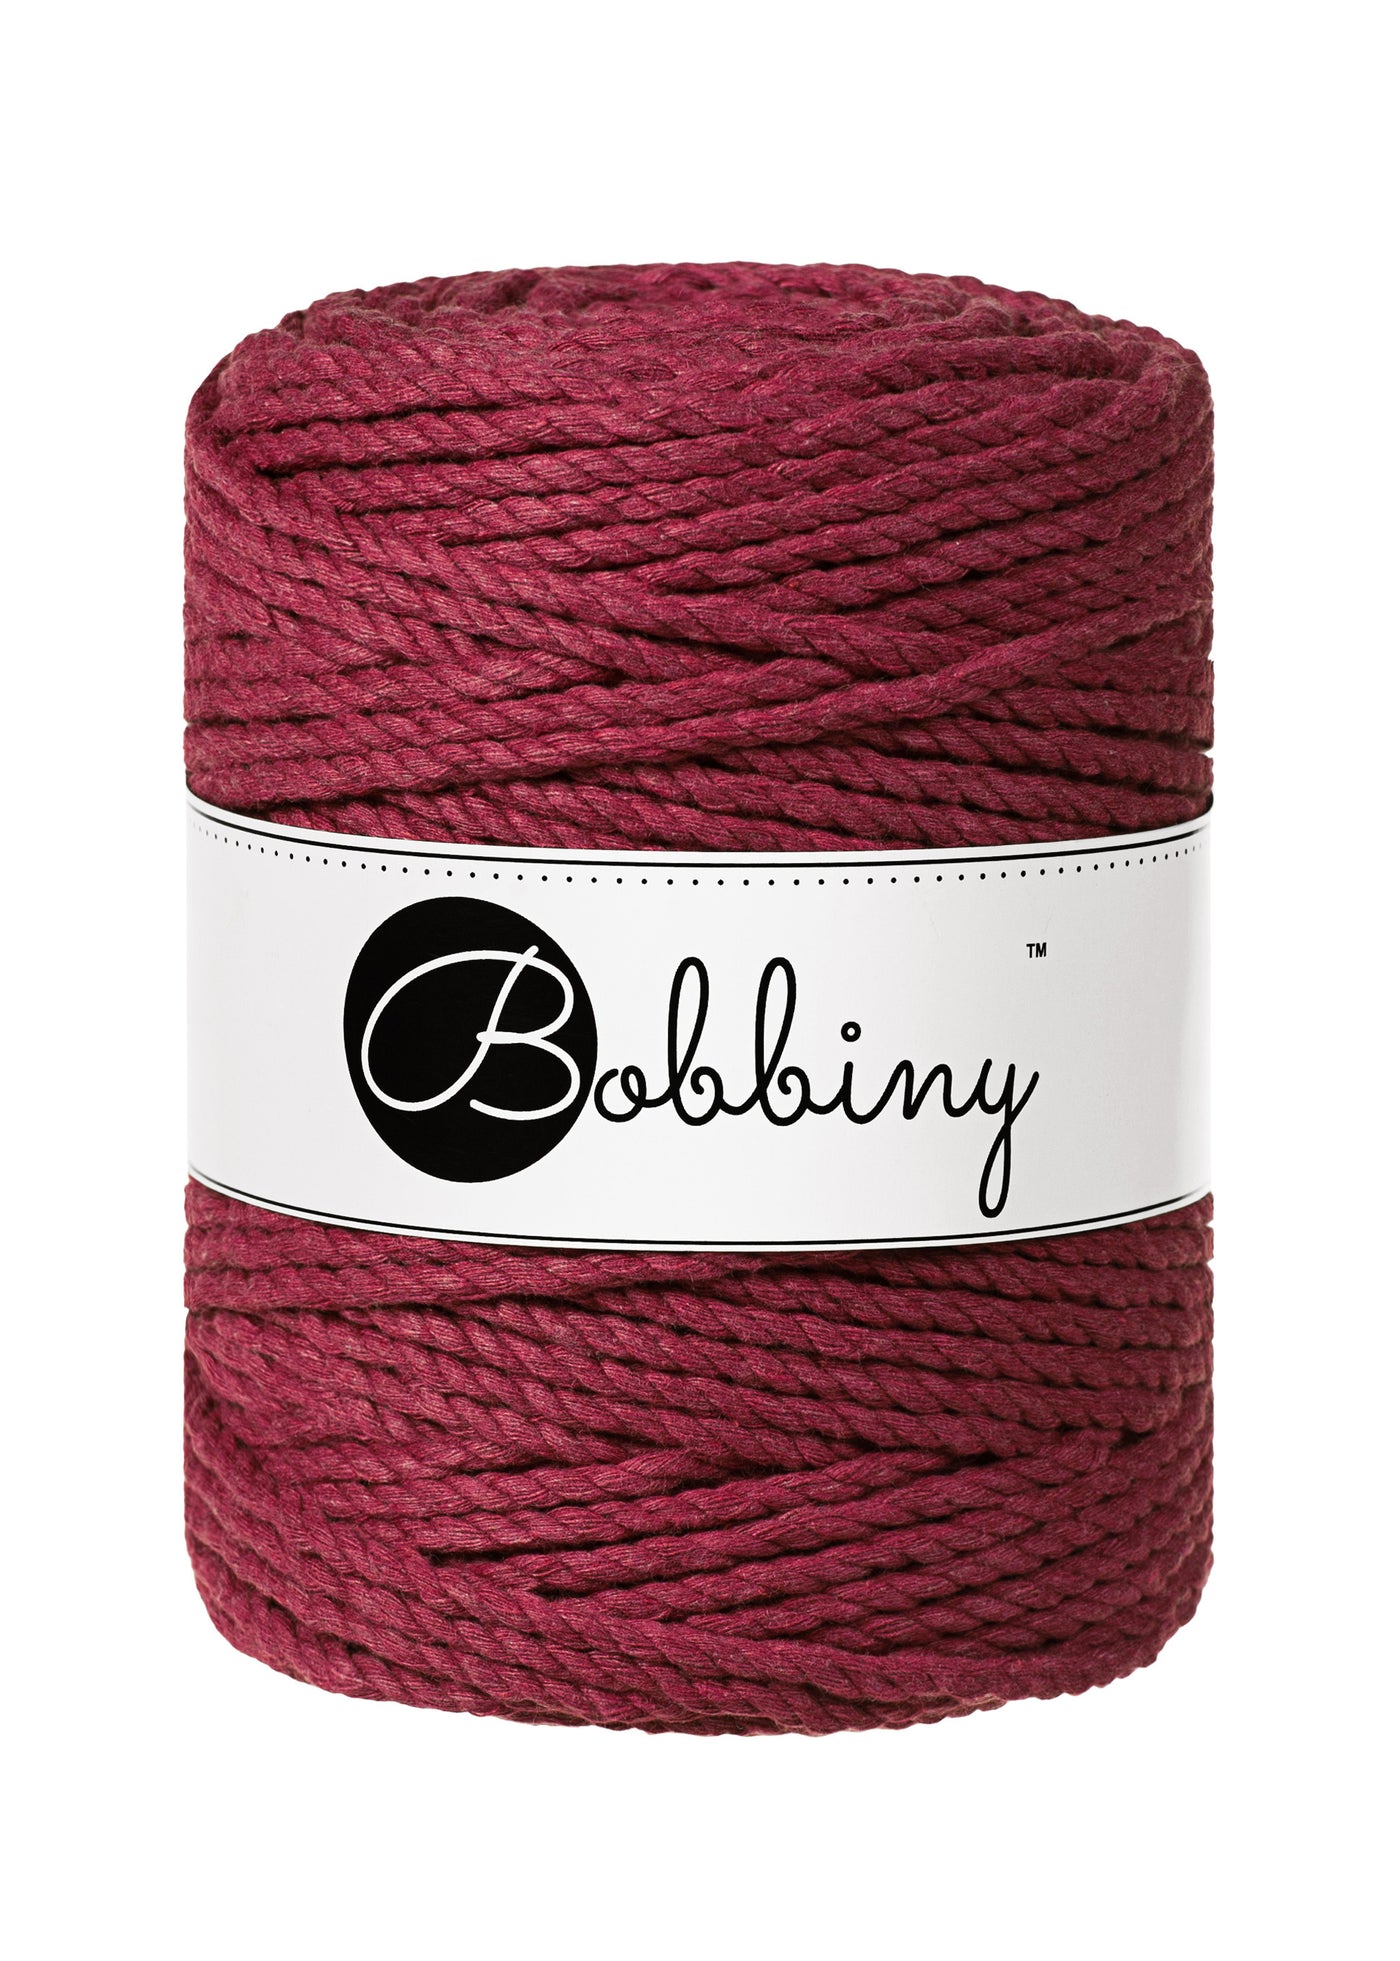 Bobbiny 3ply 5mm Macrame Rope in Wine Red shade 